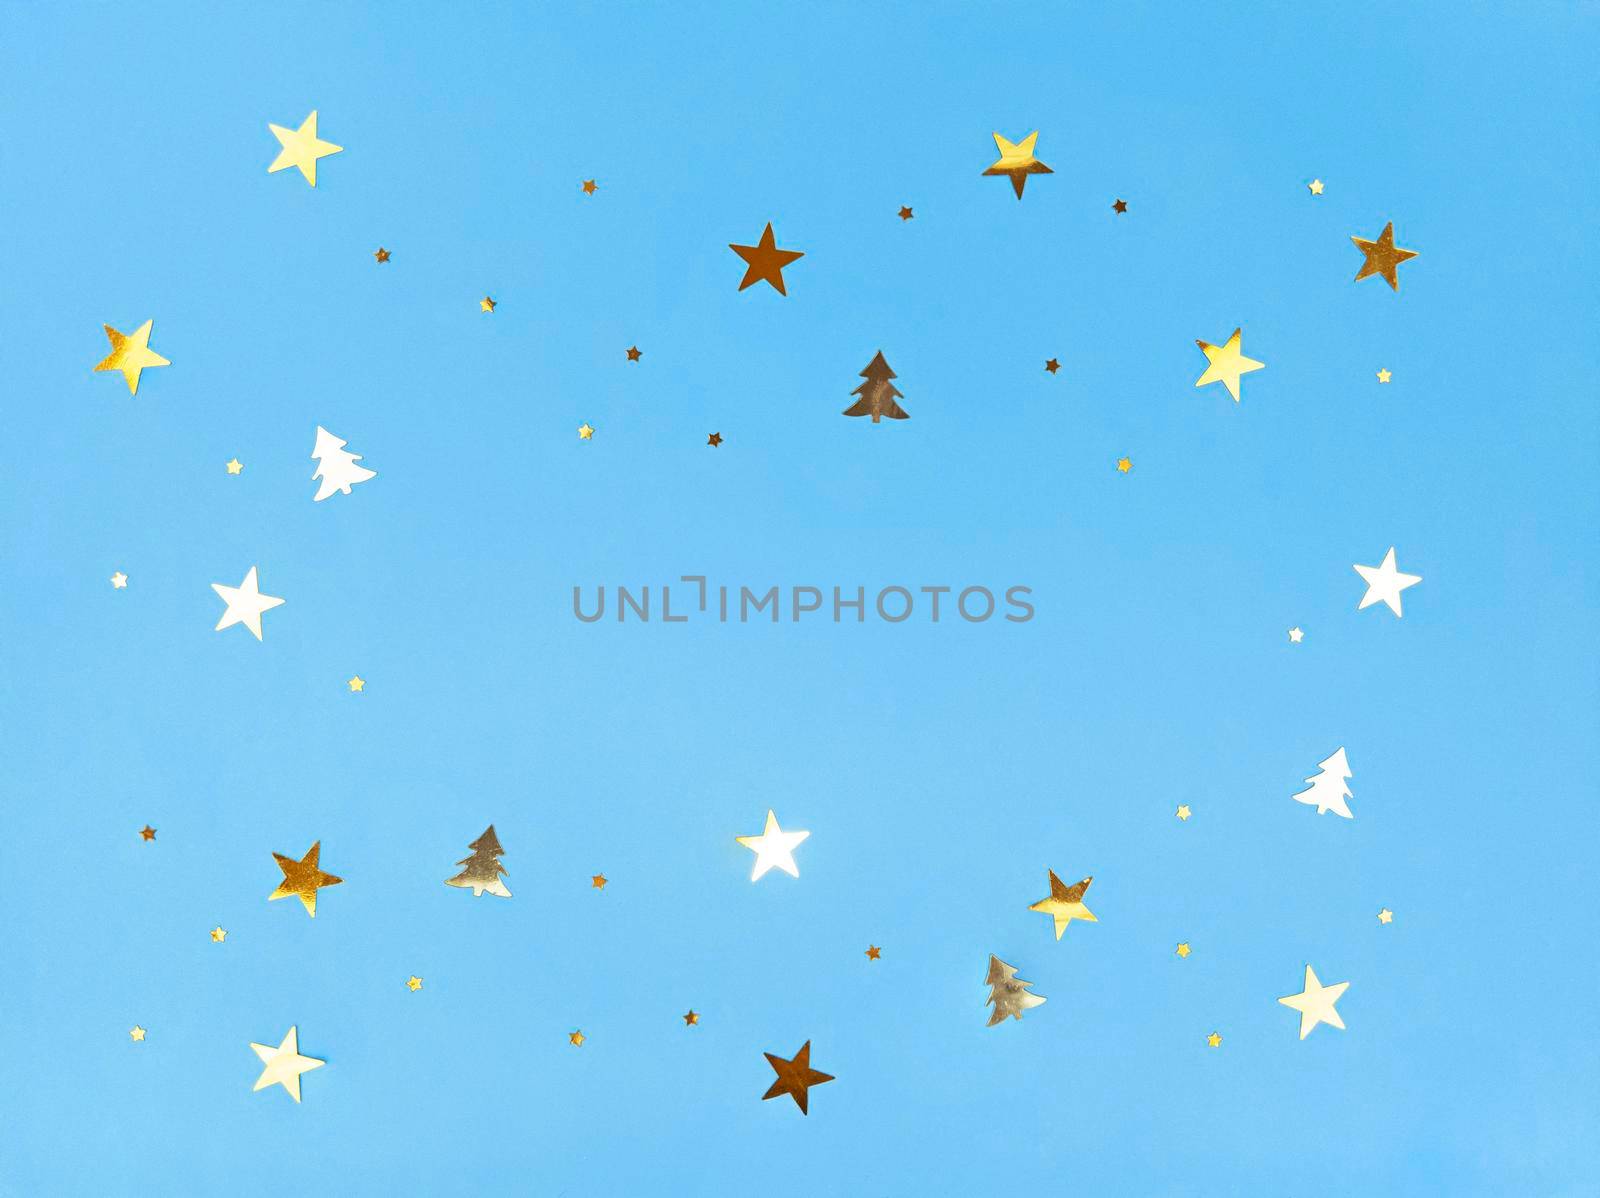 Confetti stars and trees sparkling on a blue background.